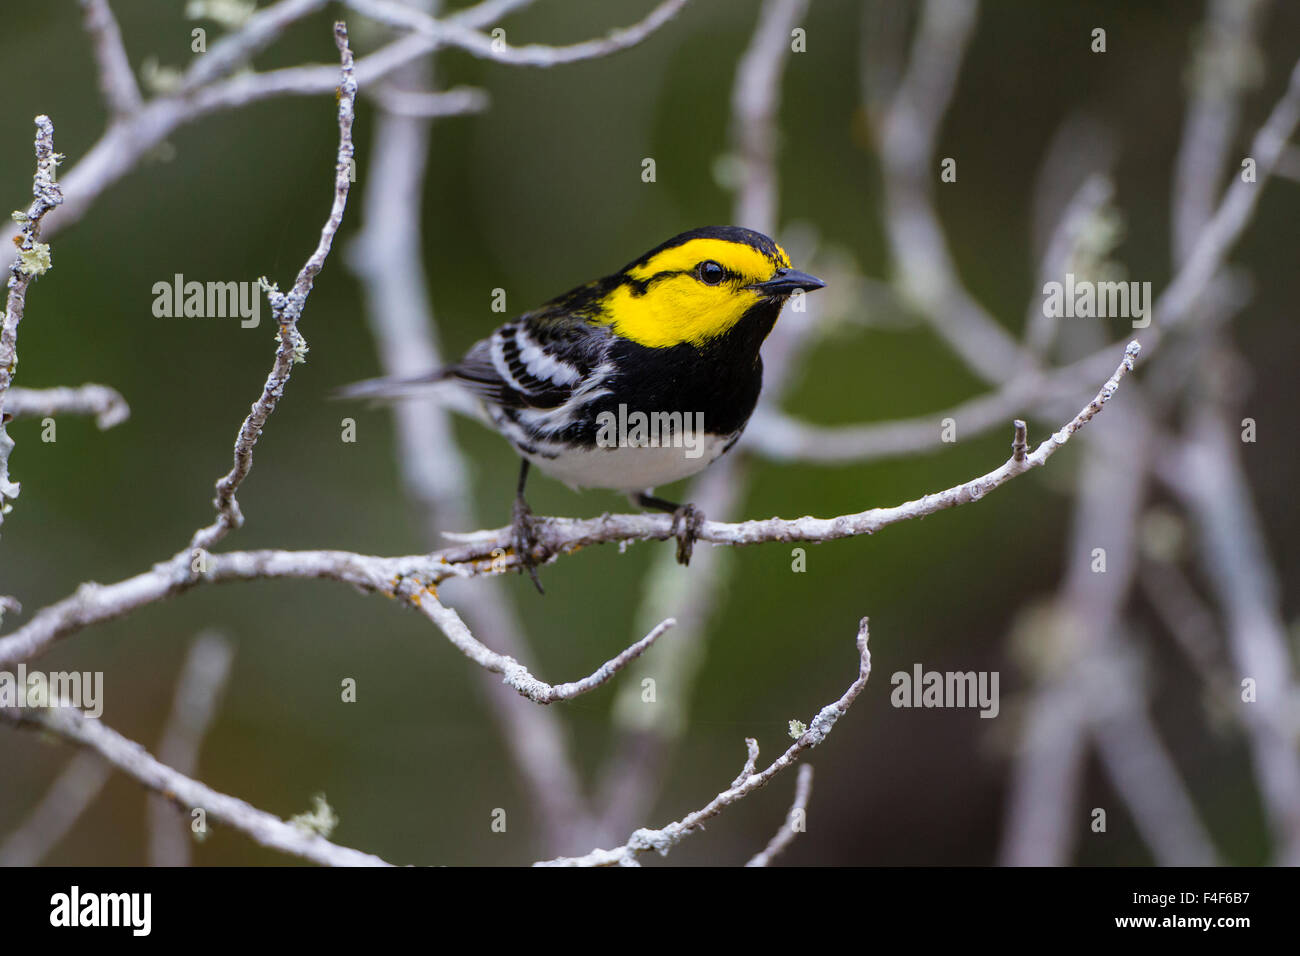 Kinney County, Texas. Golden-cheeked Warbler (Dendroica chrysoparia) on breeding territory in juniper thicket Stock Photo